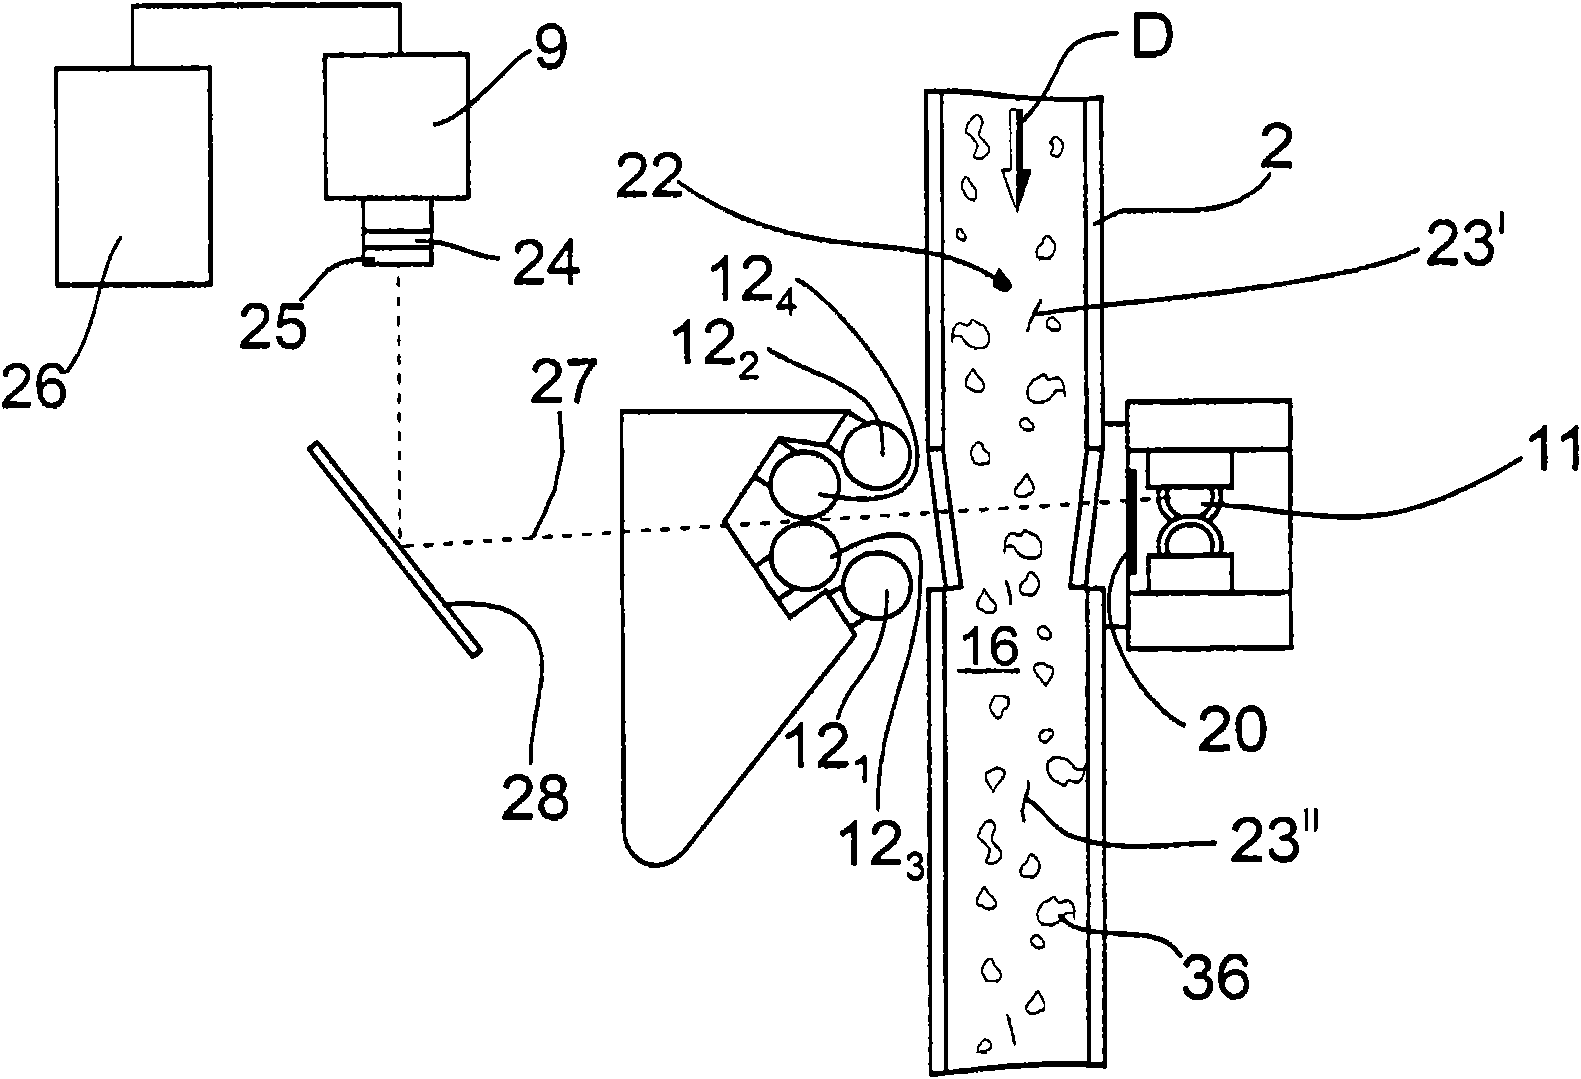 Apparatus in a spinning room preparation, ginning or the like installation for detection of foreign matter in fibre material